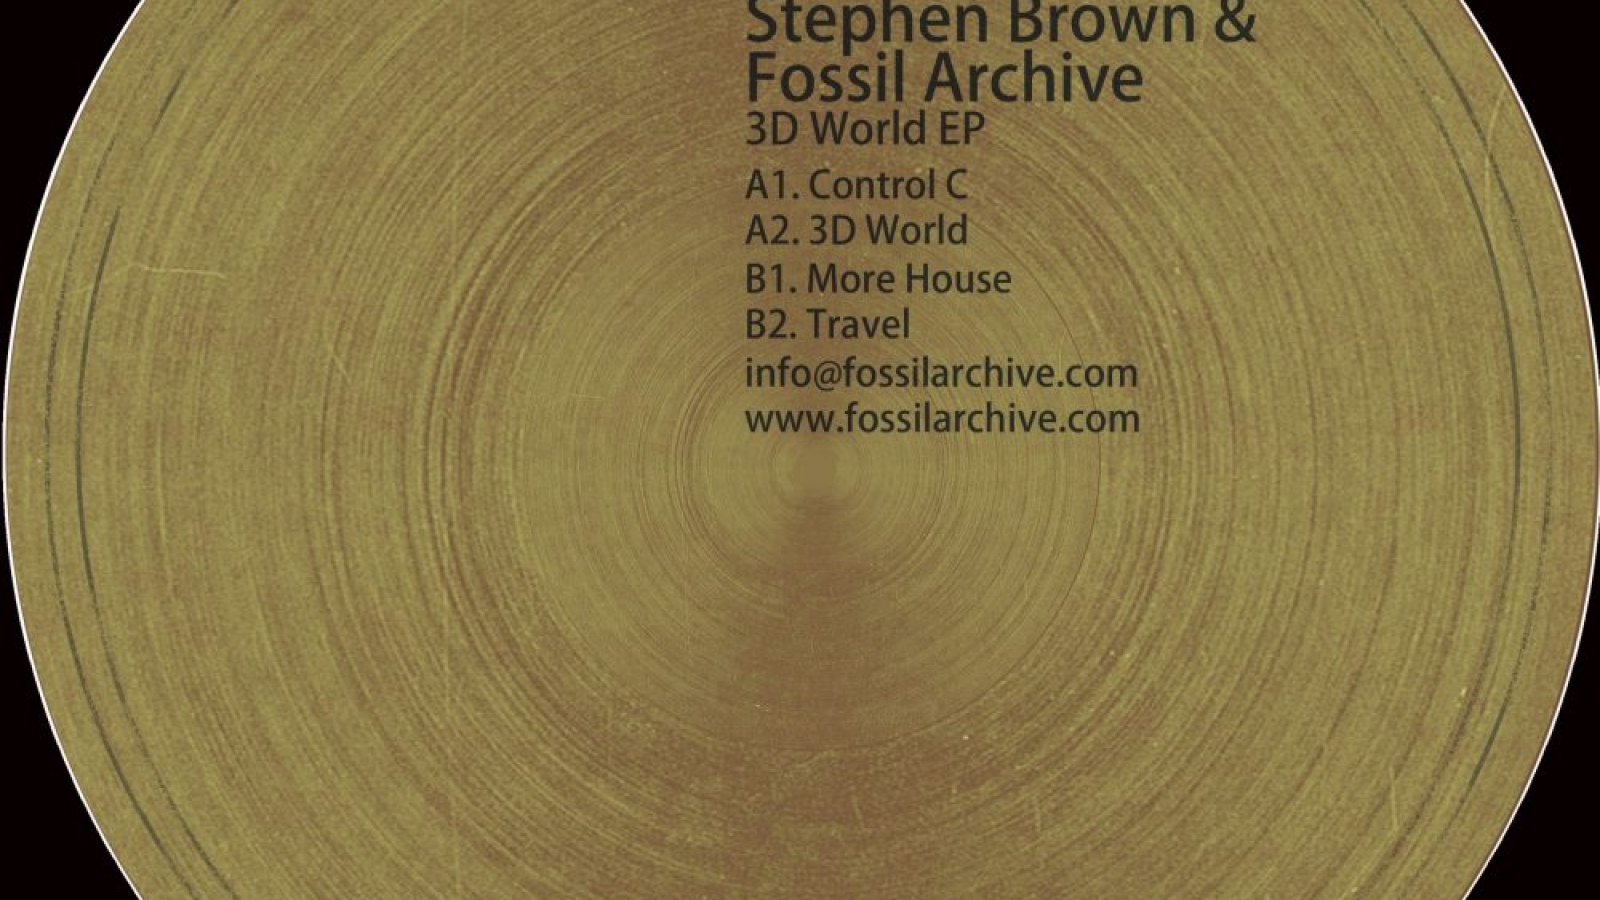 PACK SHOT - Stephen Brown & Fossil Archive - 3D World EP - Fossil Archive